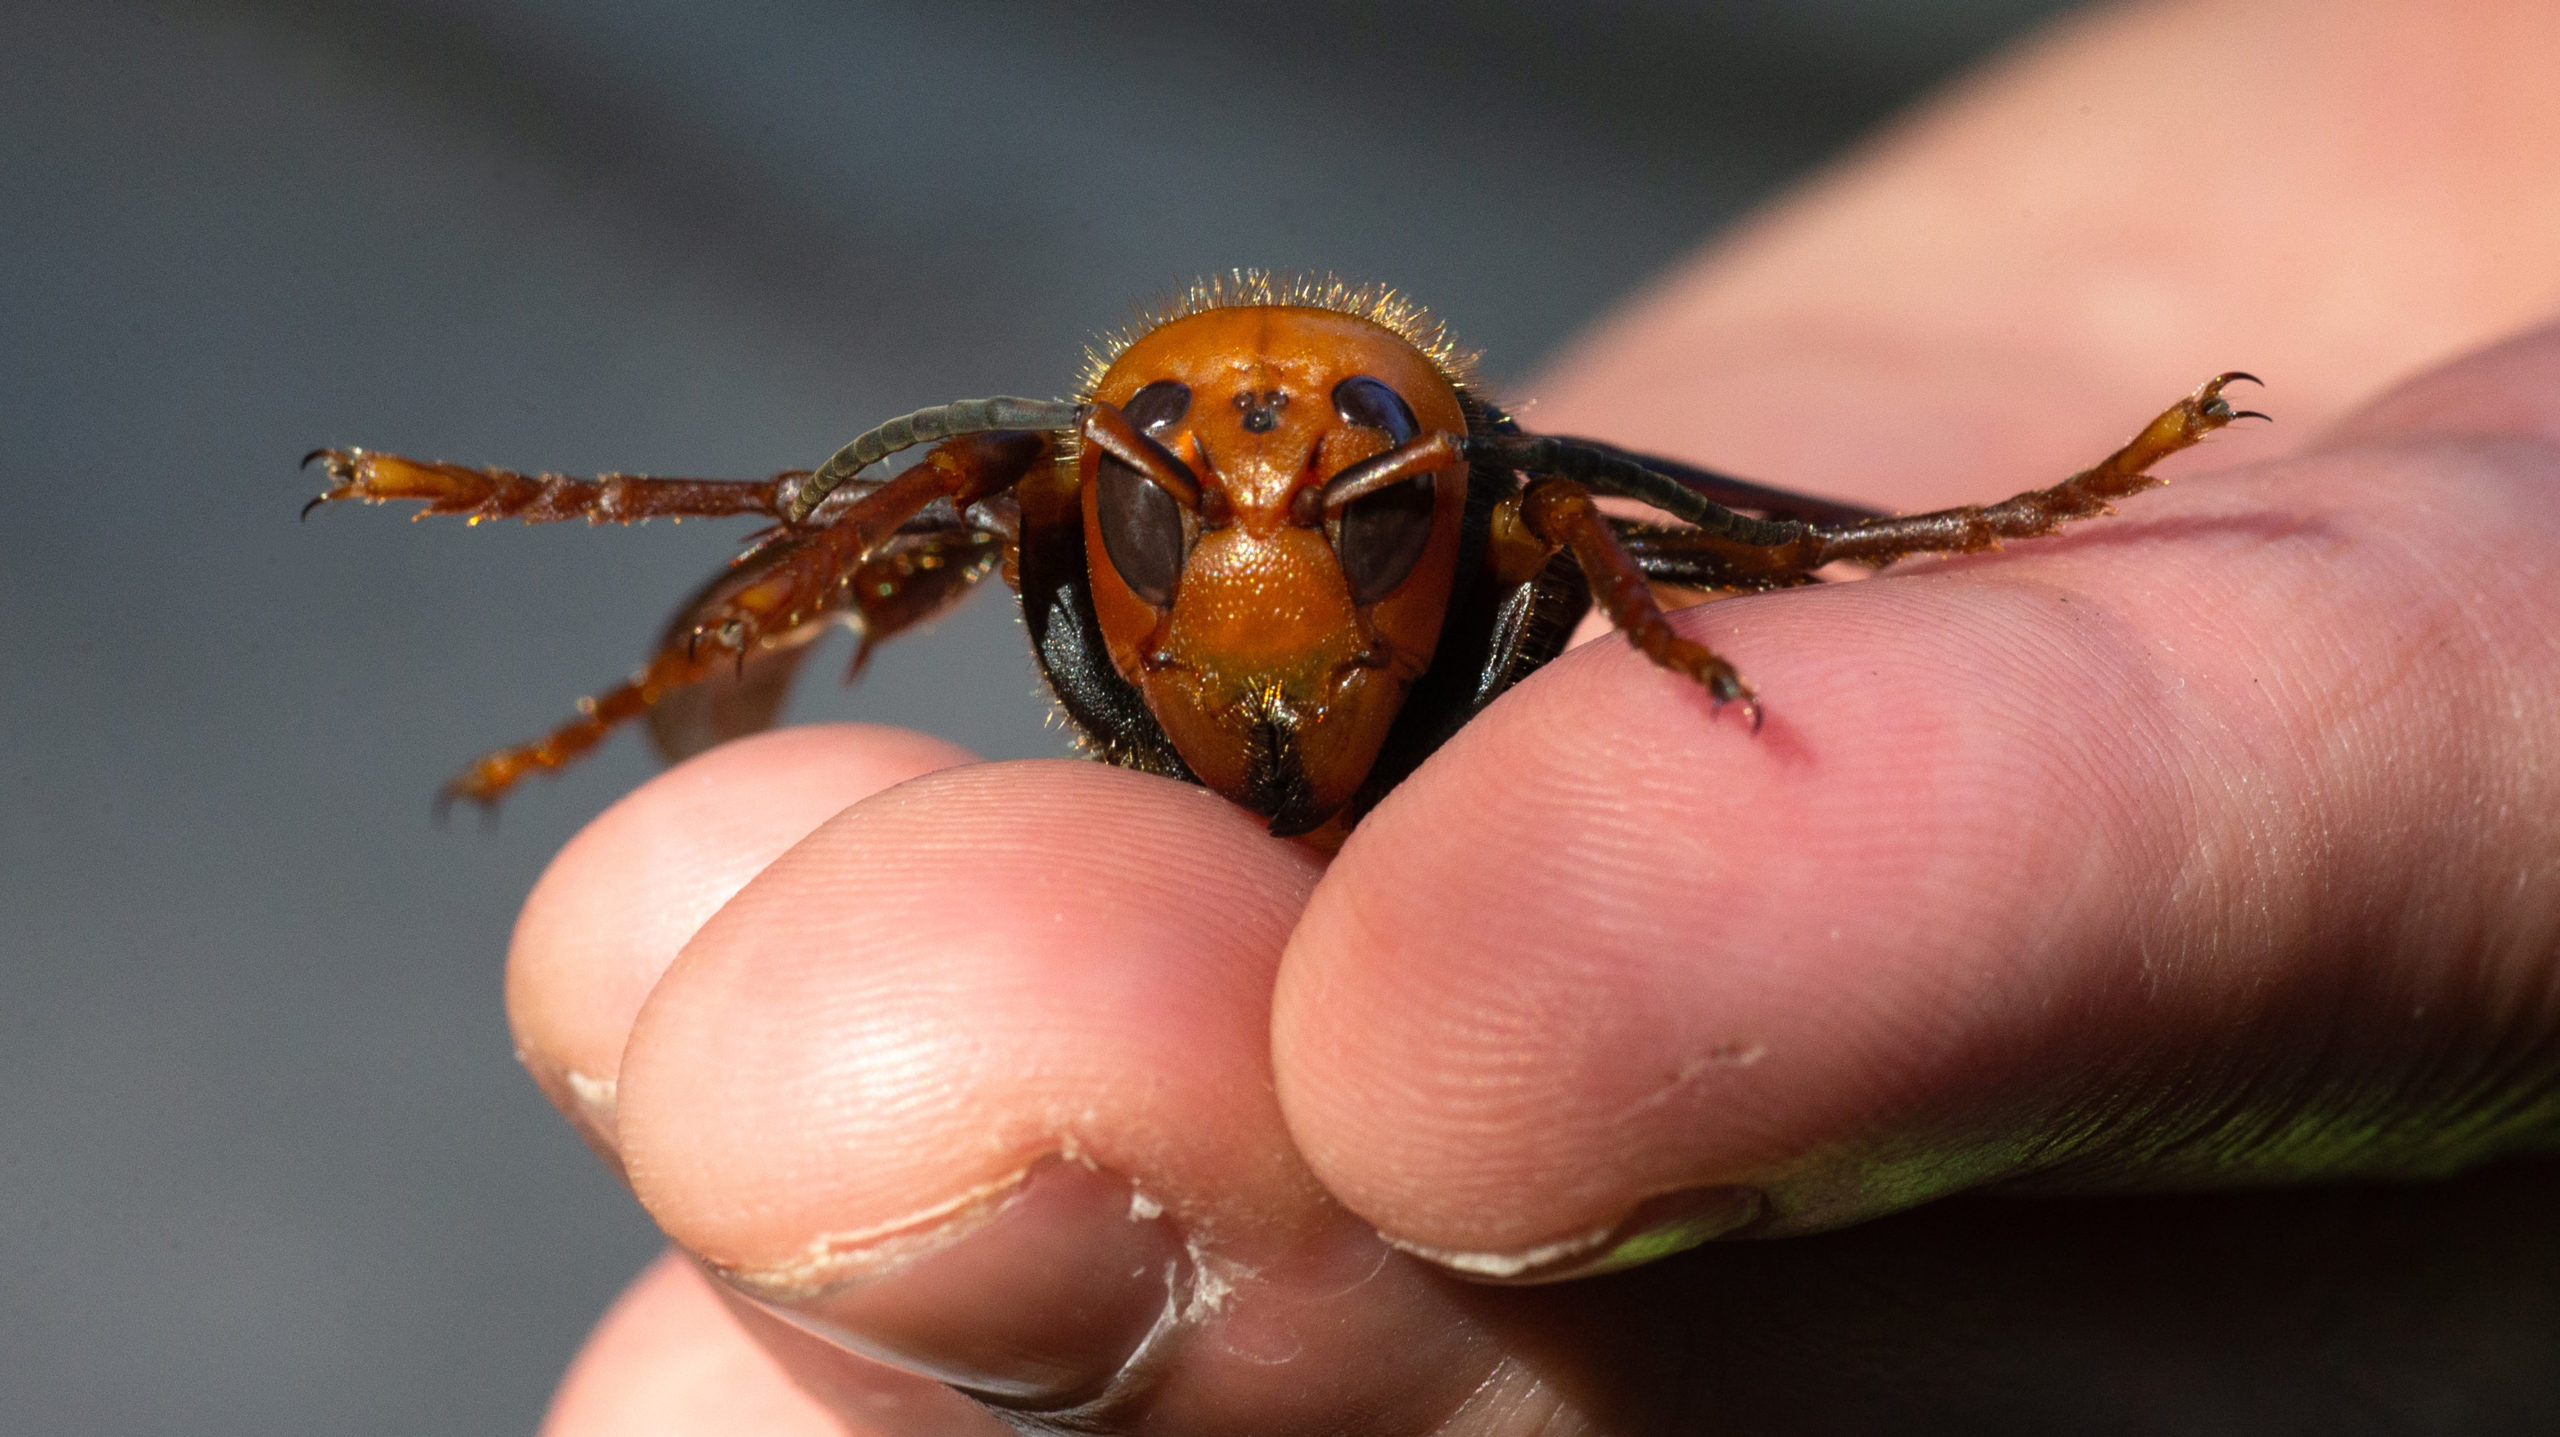 A murder hornet from Japan being displayed by a Washington State Department of Agriculture pest biologist in Bellingham, Washington in July 2020. (Photo: Karen Ducey, Getty Images)